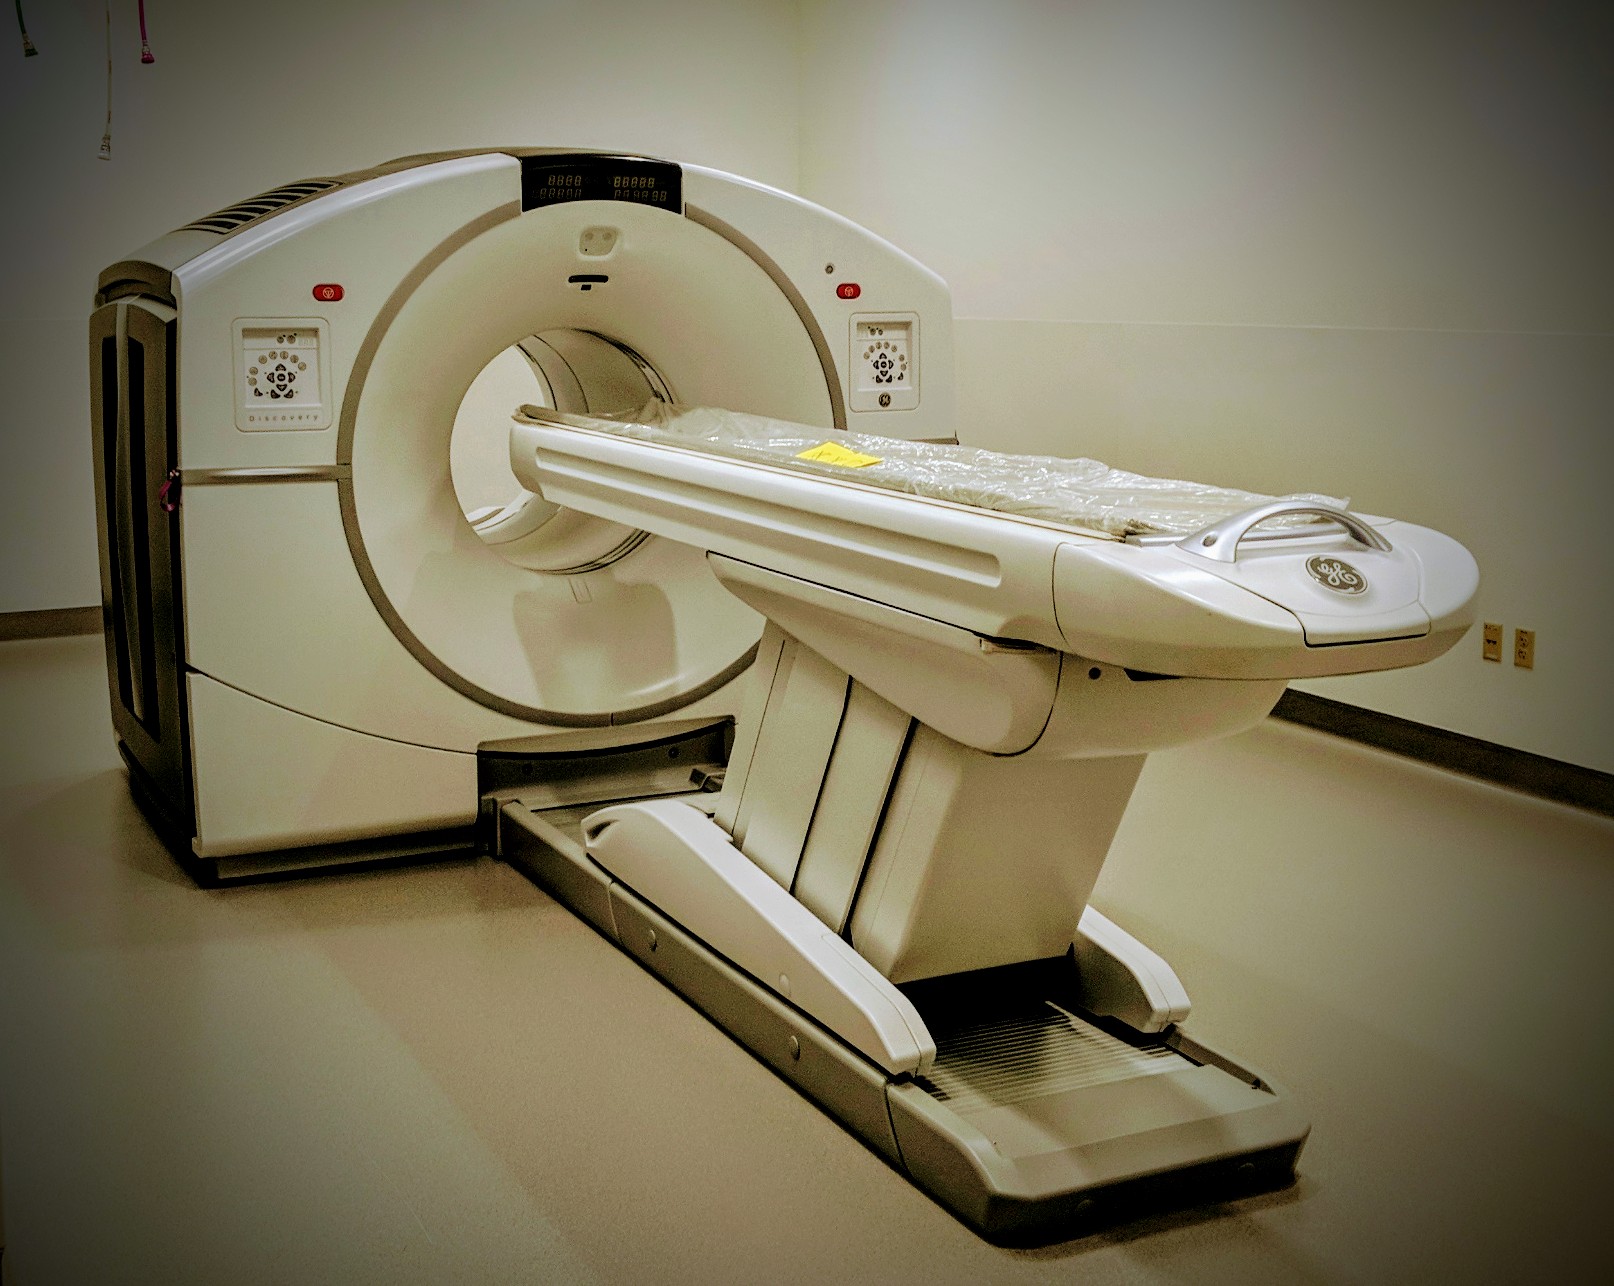 GE Discovery MI PET/CT Scanner